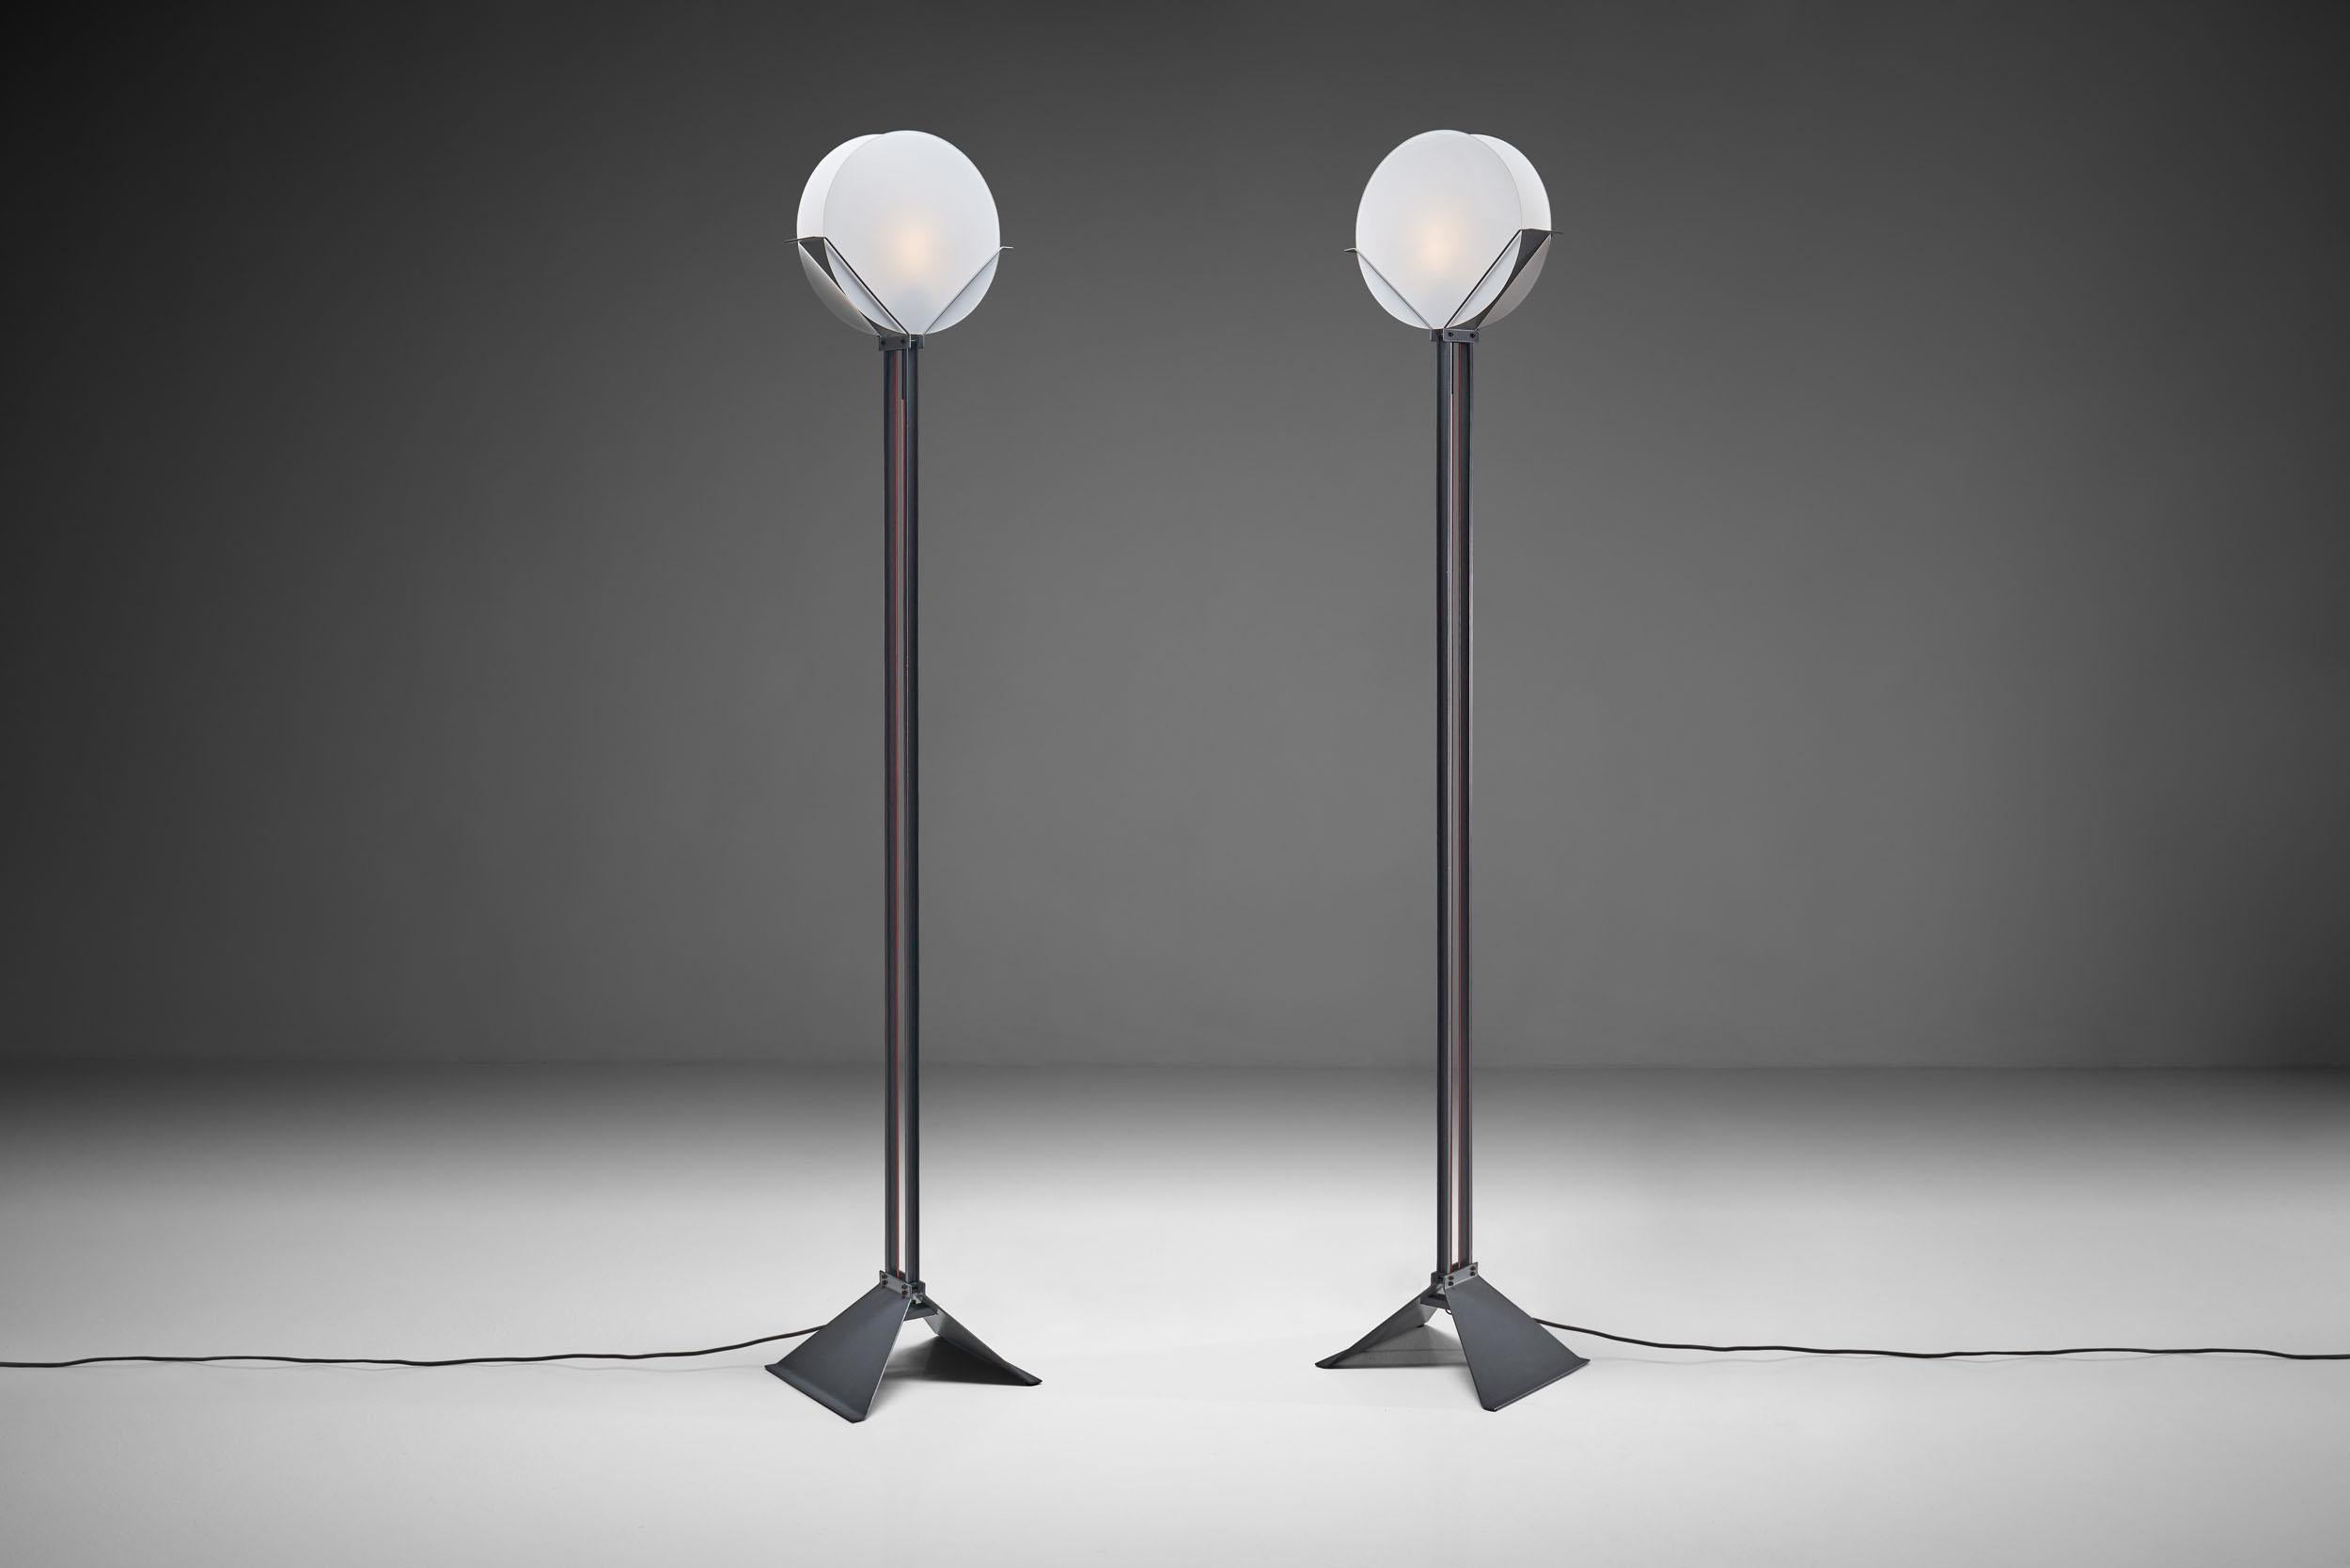 Pair of Limited Edition Menno Dieperink Floor Lamps, Netherlands, 1983 In Good Condition For Sale In Utrecht, NL